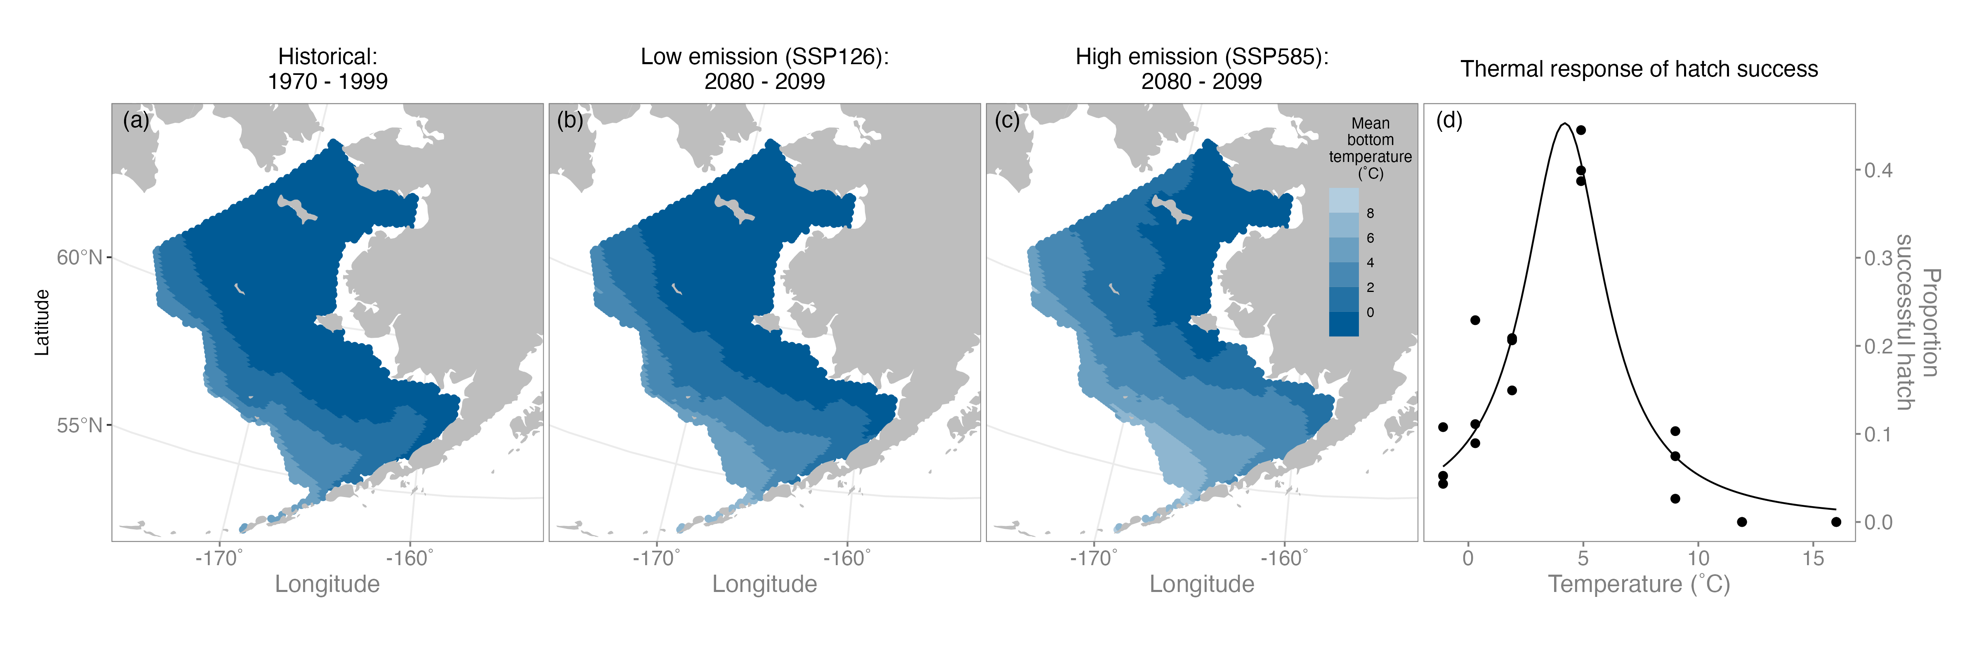 3 panels show maps of predicted bottom temperature (historical, low emission scenario, high emission scenario. The 4th panel  is a line graph showing the curve of Pacific cod hatch success vs temperature.